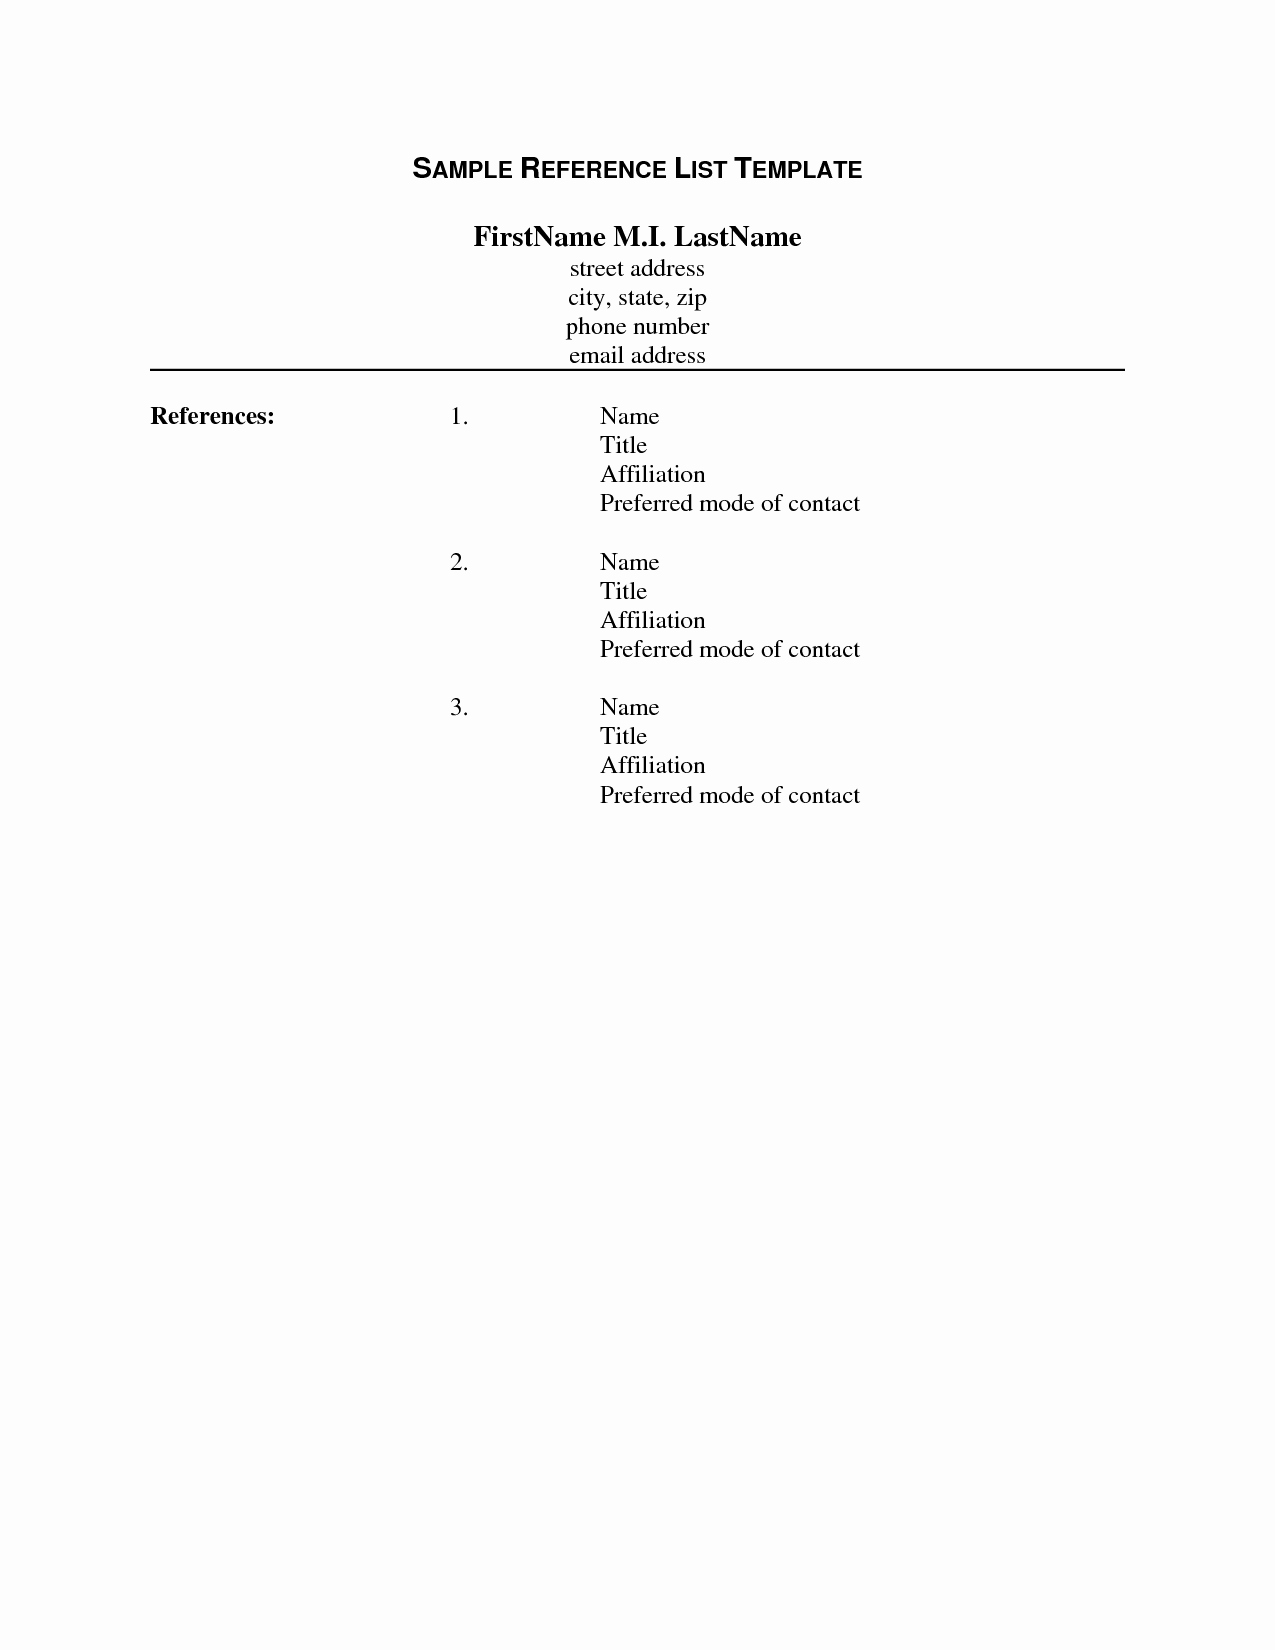 Reference List Template Microsoft Word New List References Template